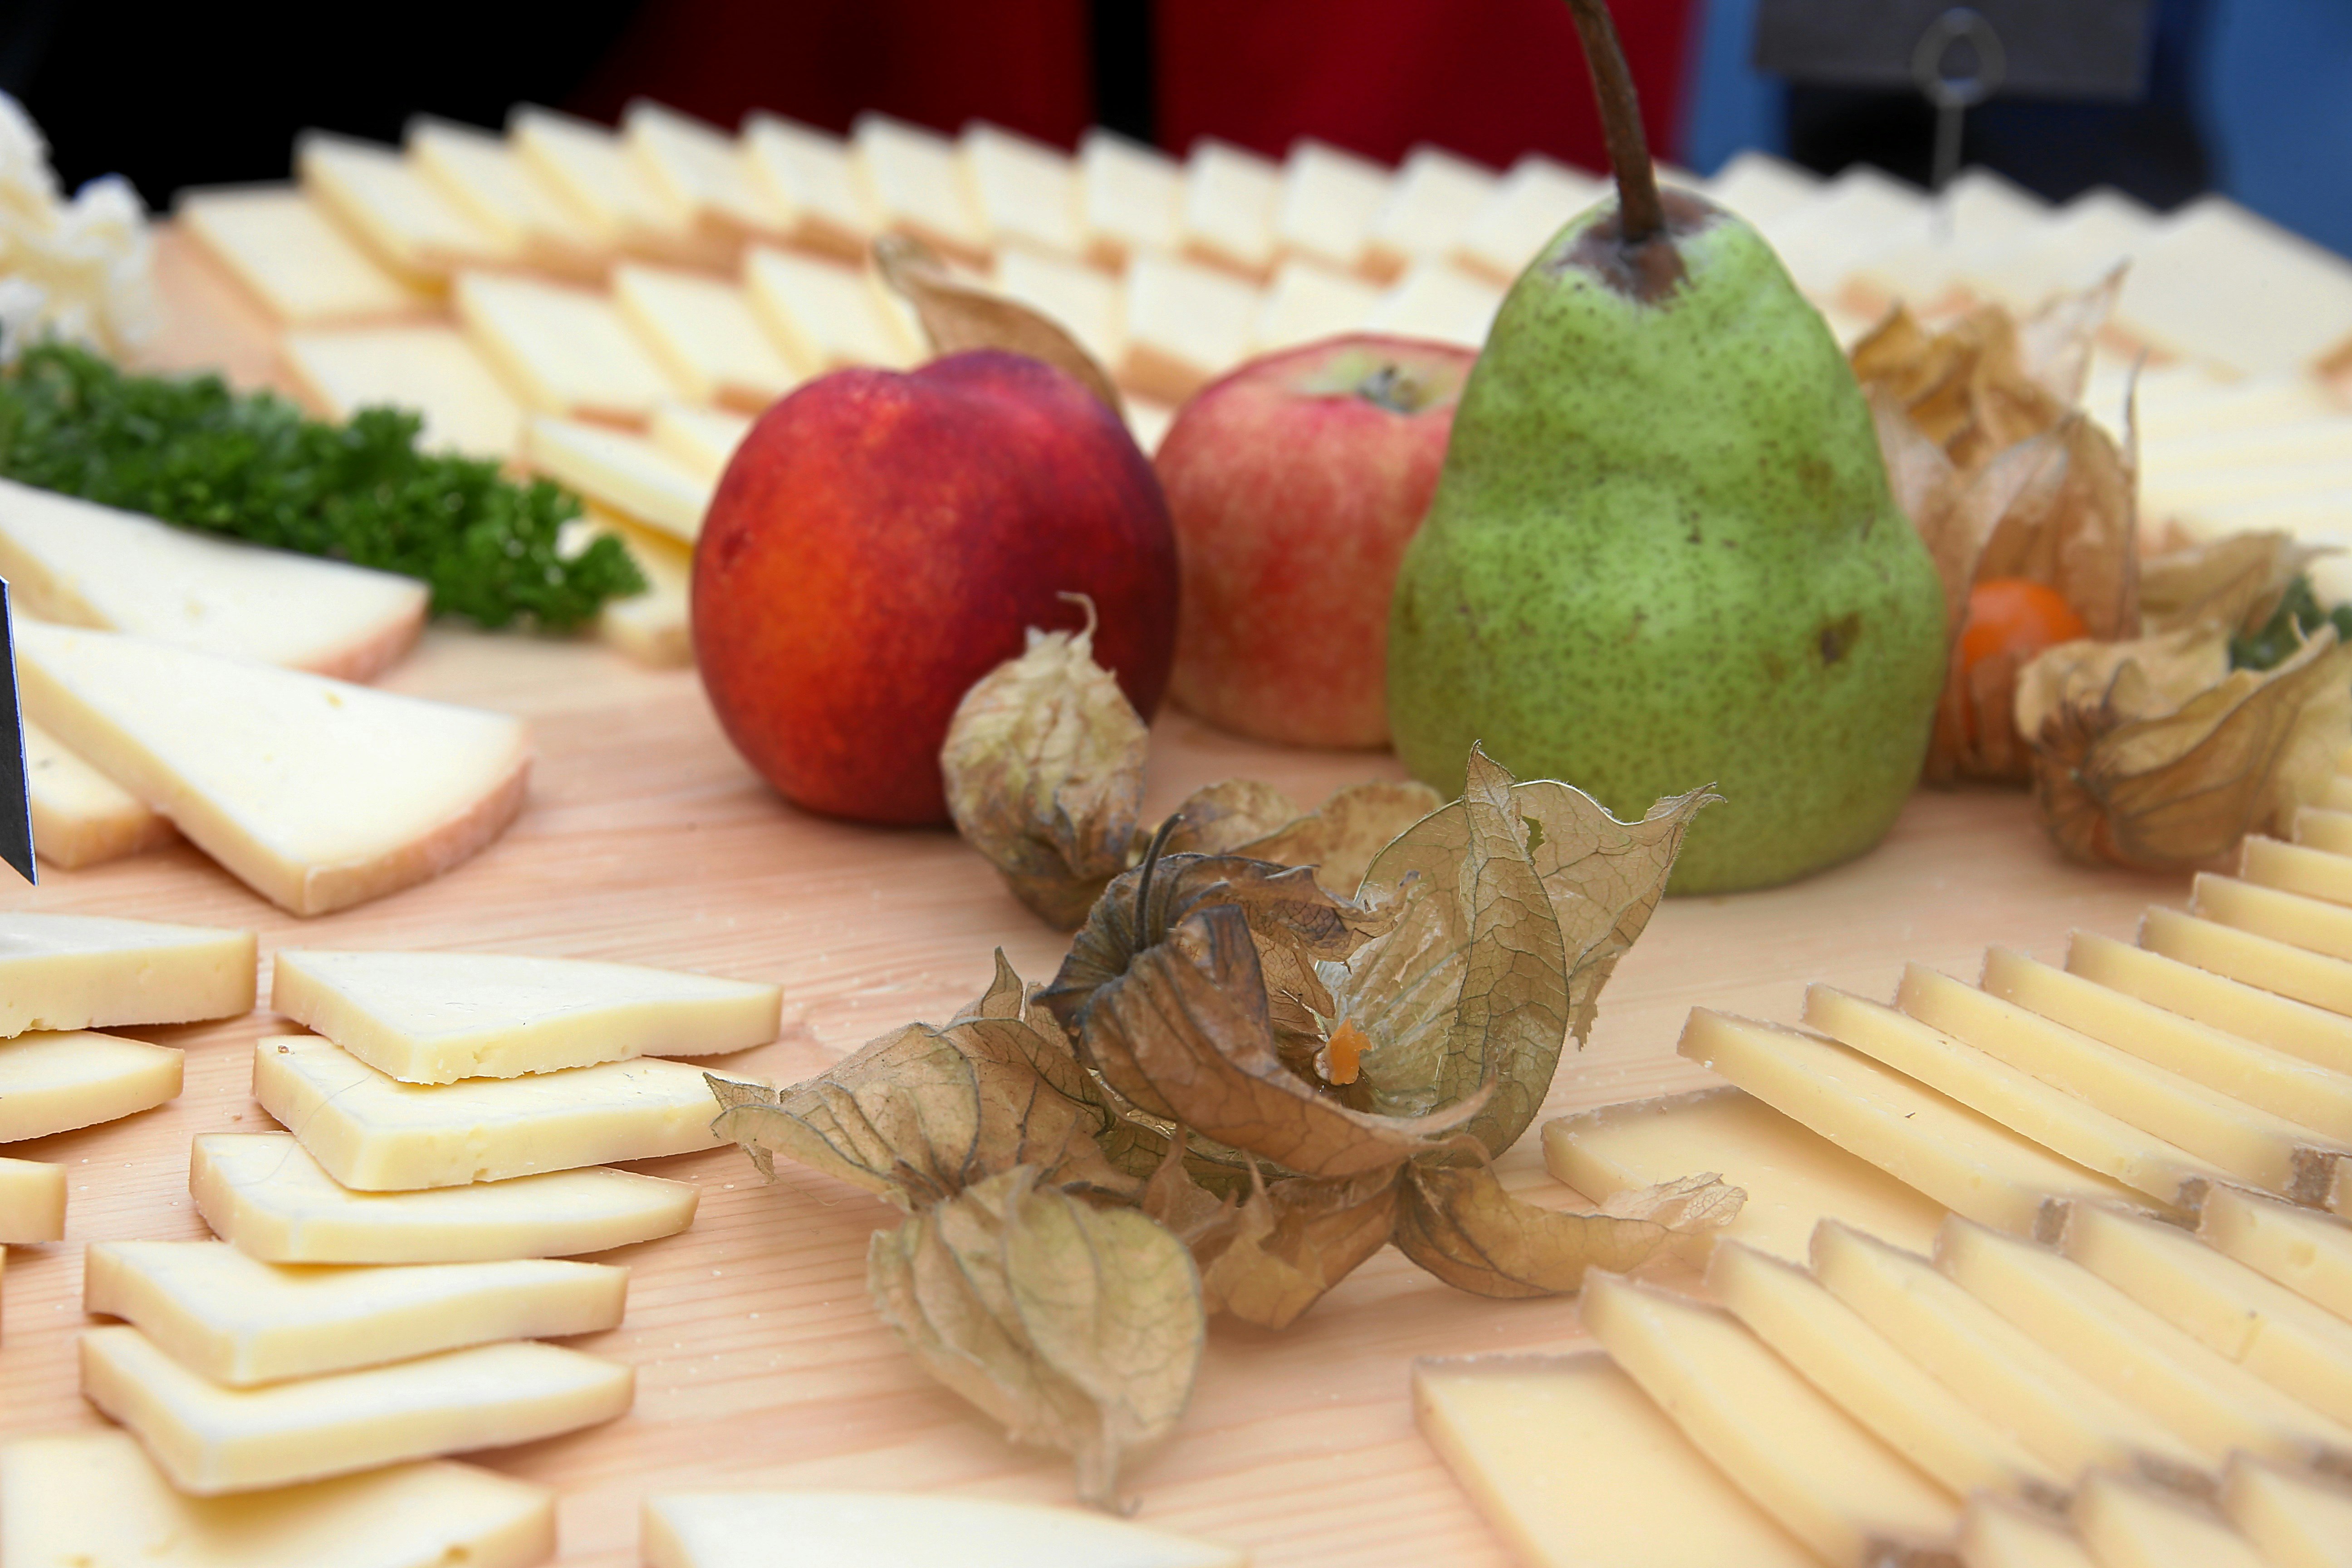 A cheese platter with several varieties of delicious Swiss cheese